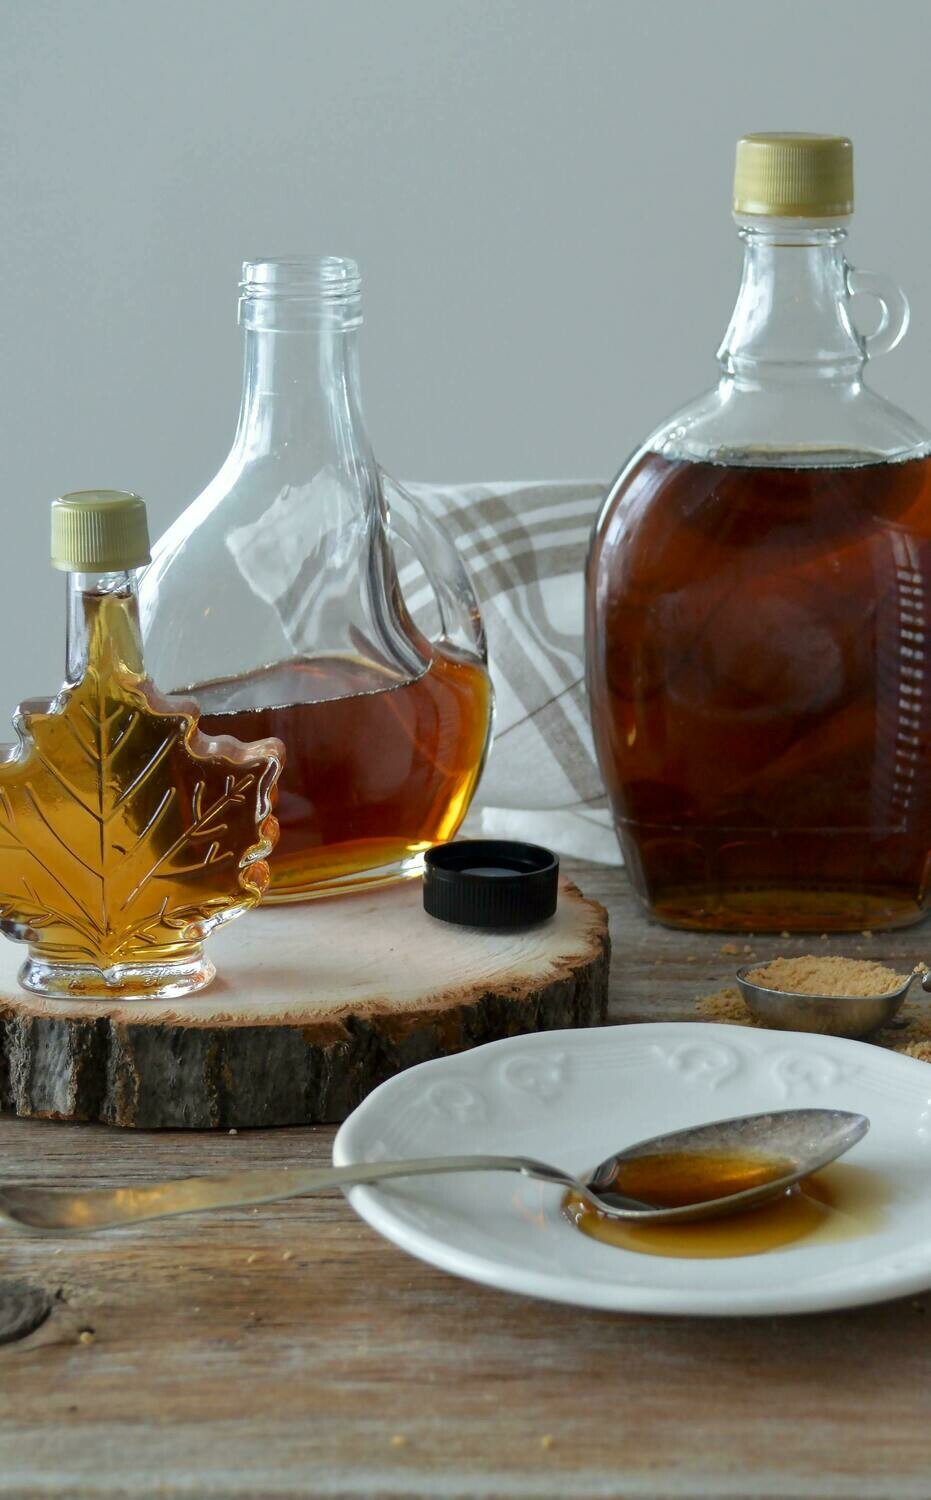 68 oz Pure Maple Syrup